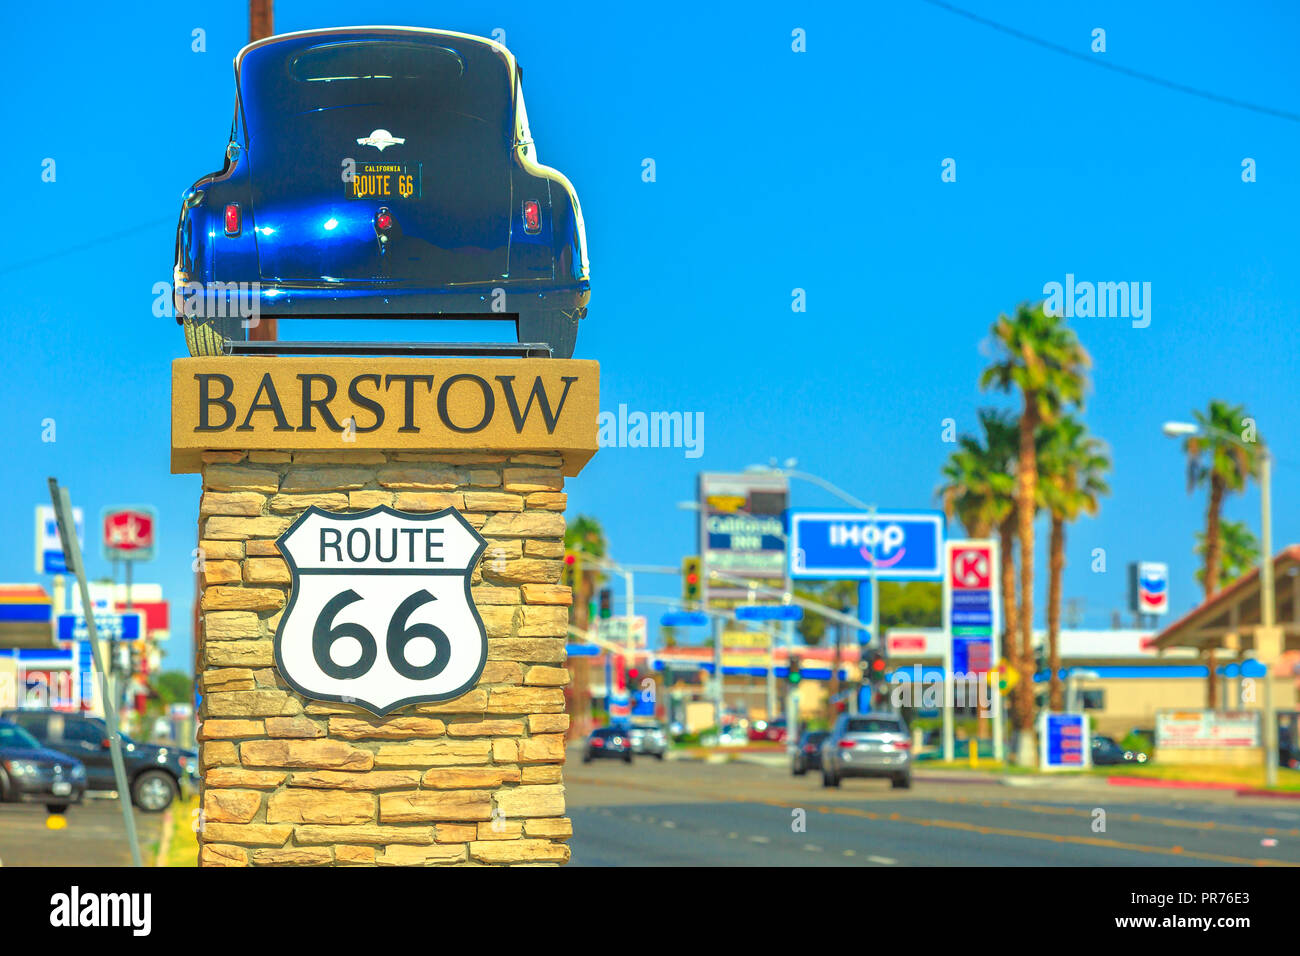 Barstow, California, USA - August 15, 2018: Barstow Sign on Route 66, the city's Main Street in San Bernardino County, an important transportation center for Inland Empire in Southern California. Stock Photo